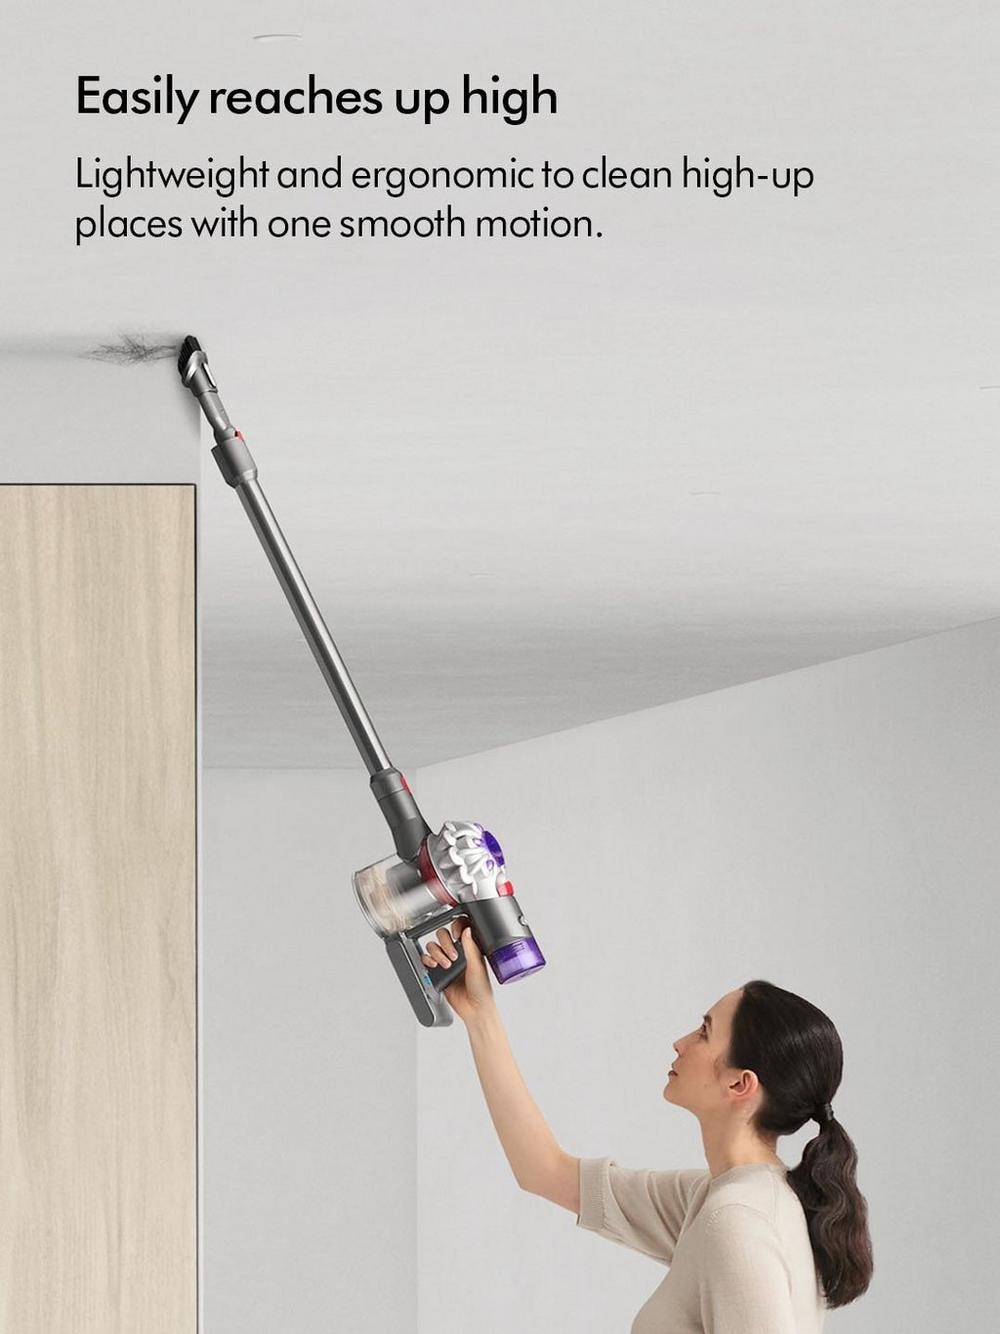 Easily reaches up high. Lightweight and ergonomic to clean high-up places with one smooth action.